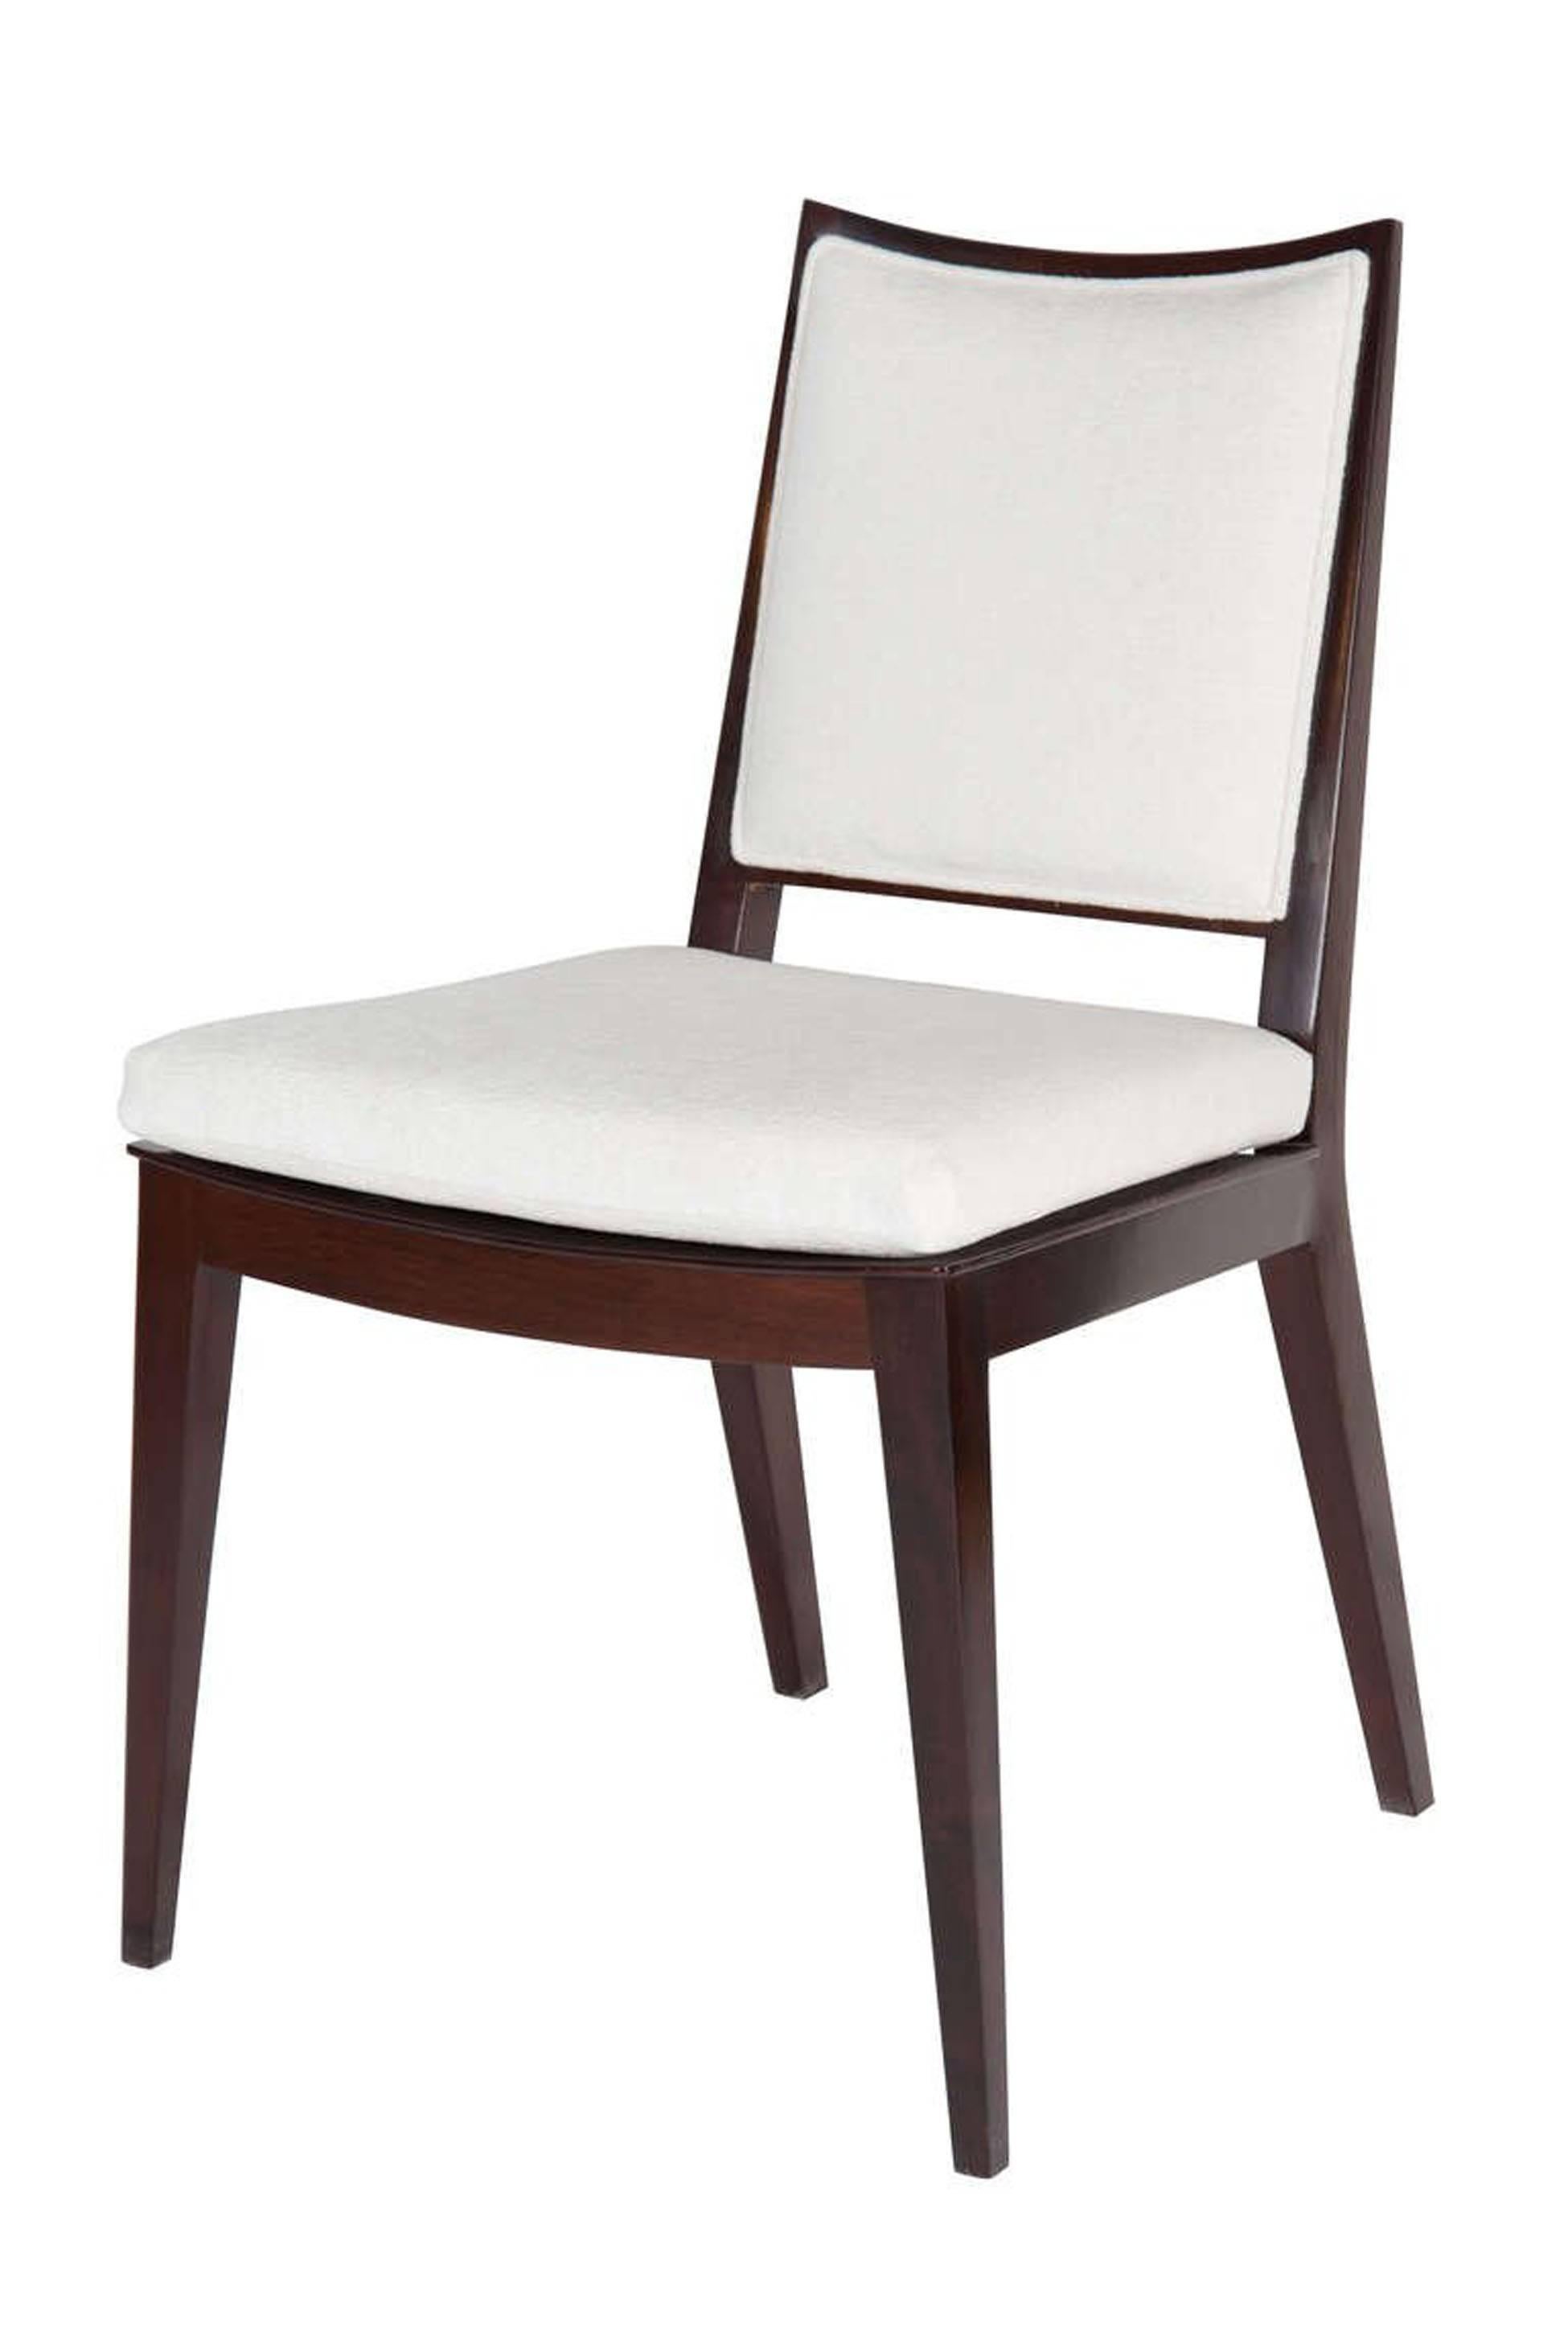 Solid mahogany frame back dining chair. 

Measures: Seat height-19”. 
Seat depth -17.5”. 

COM requirements: 2 yards.
5% up-charge for contrasting fabrics and or welting.
COL requirements:40 sq. feet.
5% percentage up-charge for all COL or